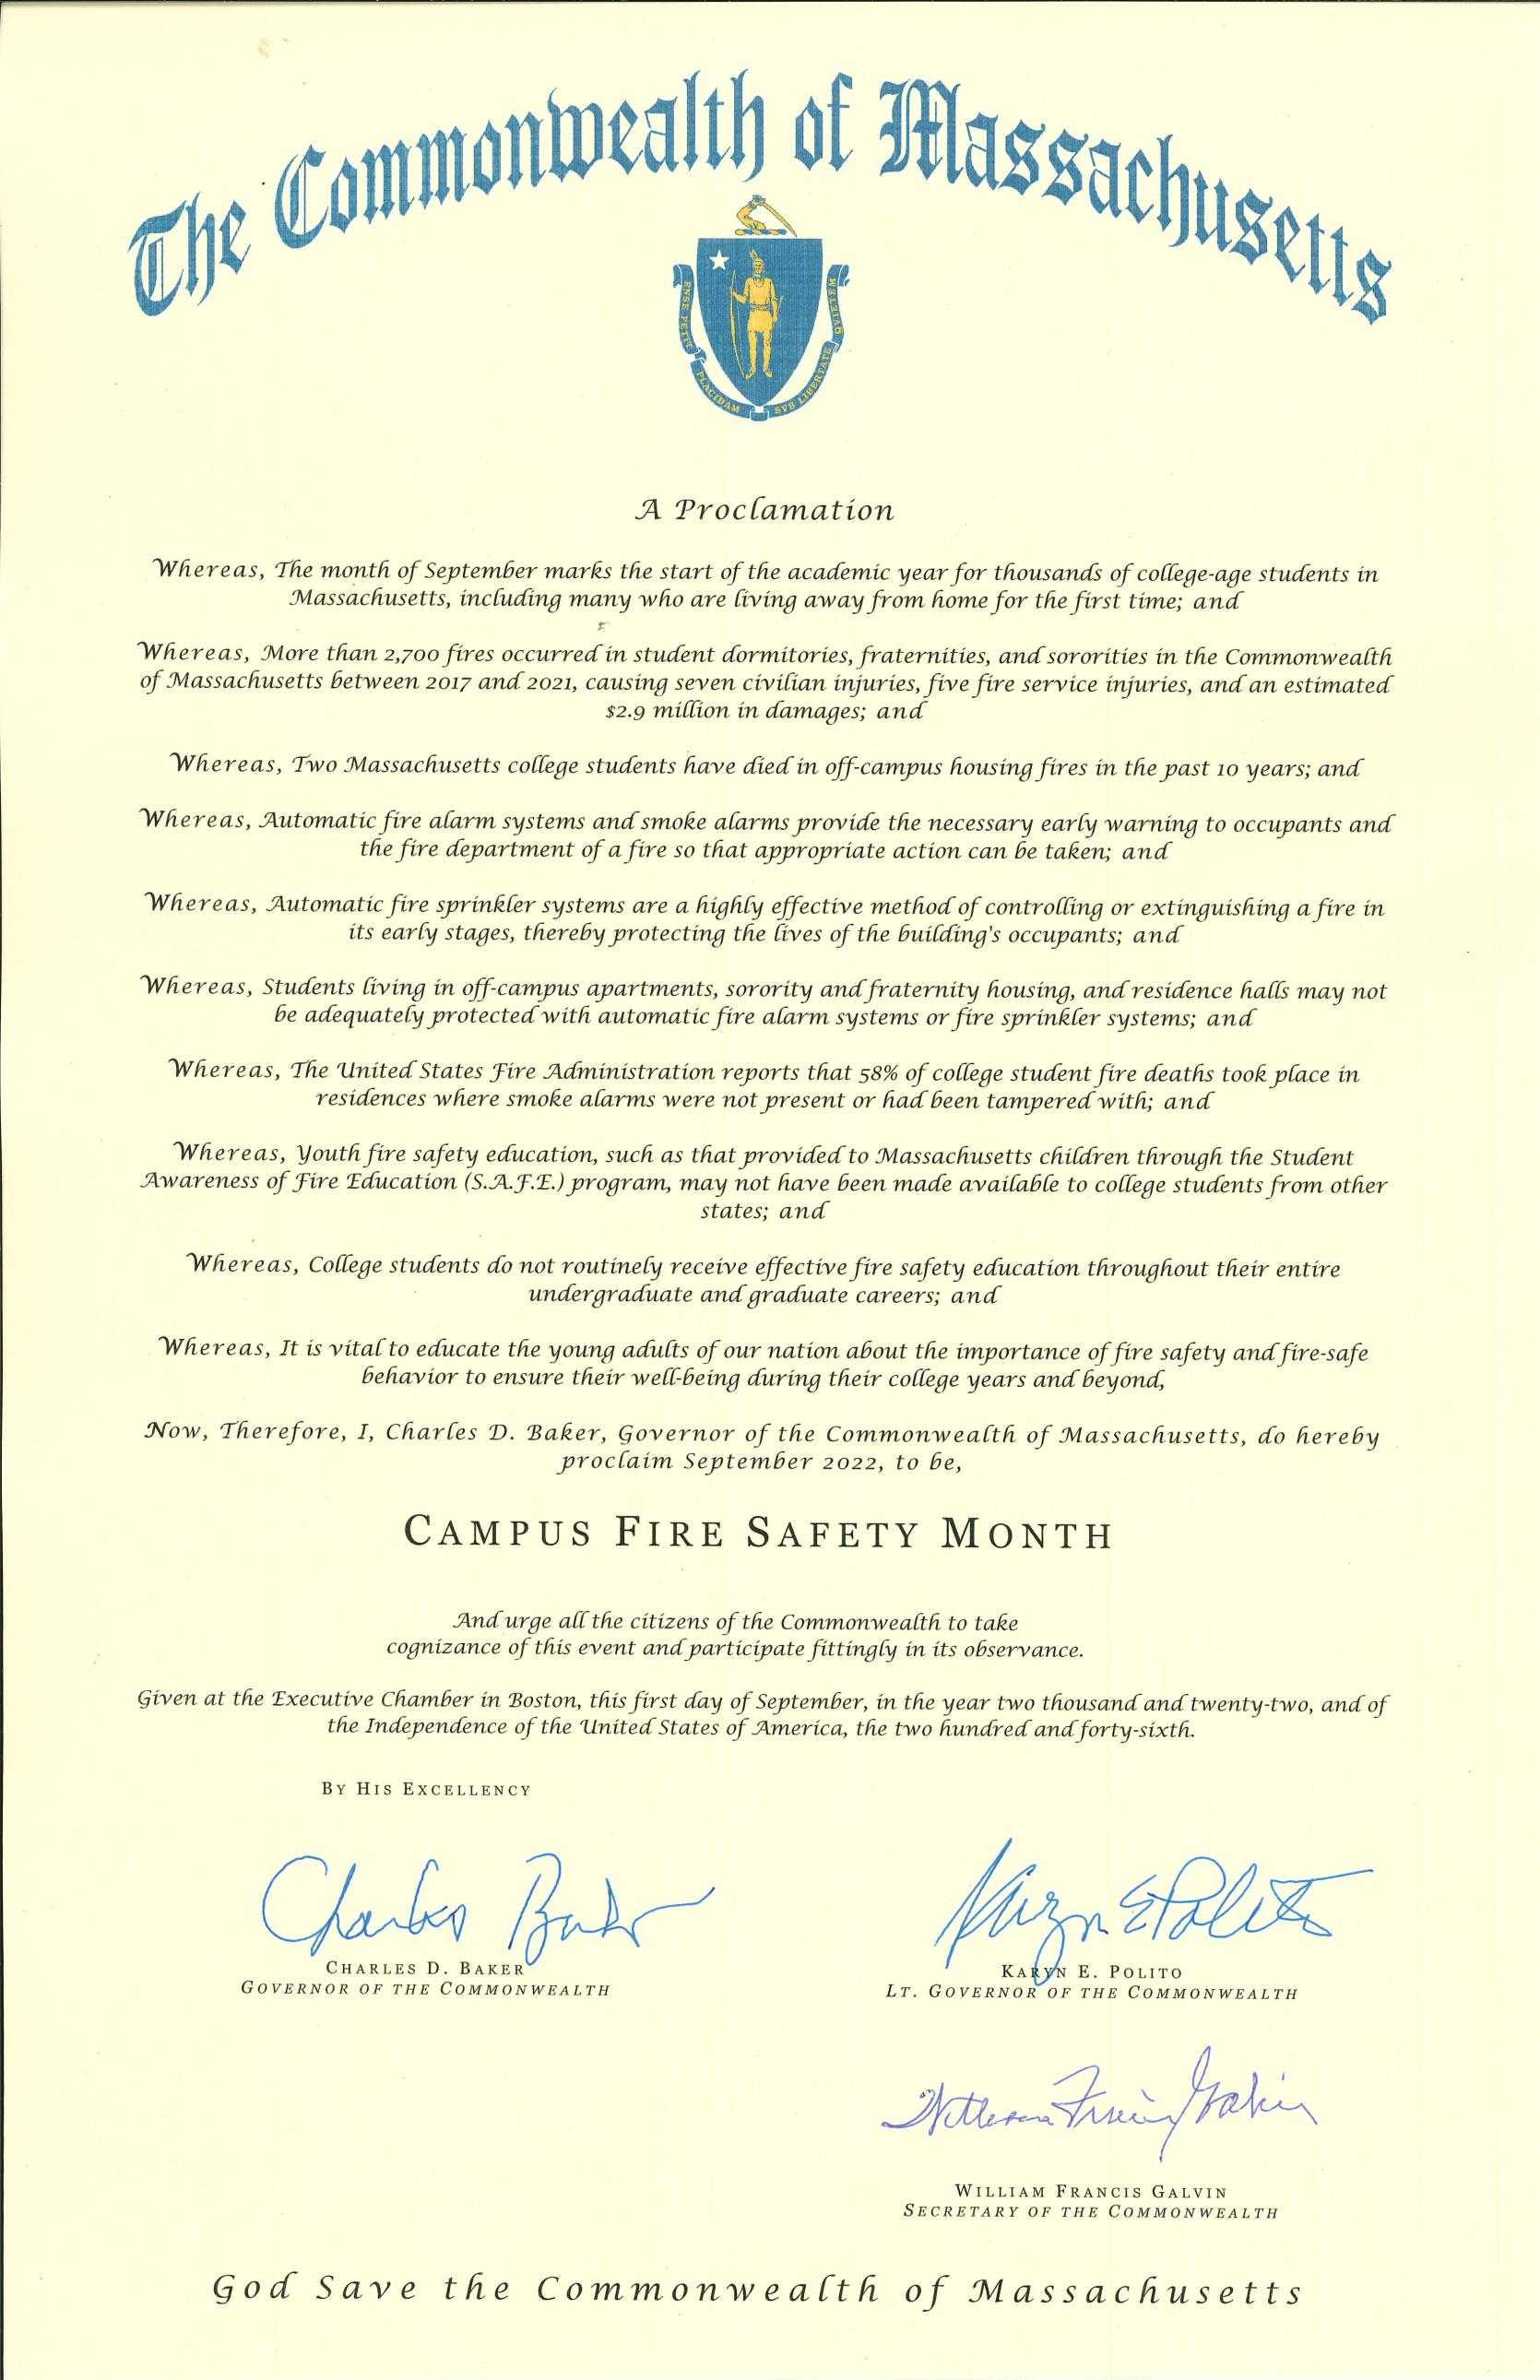 Picture of a proclamation declaring September to be Campus Fire Safety Month